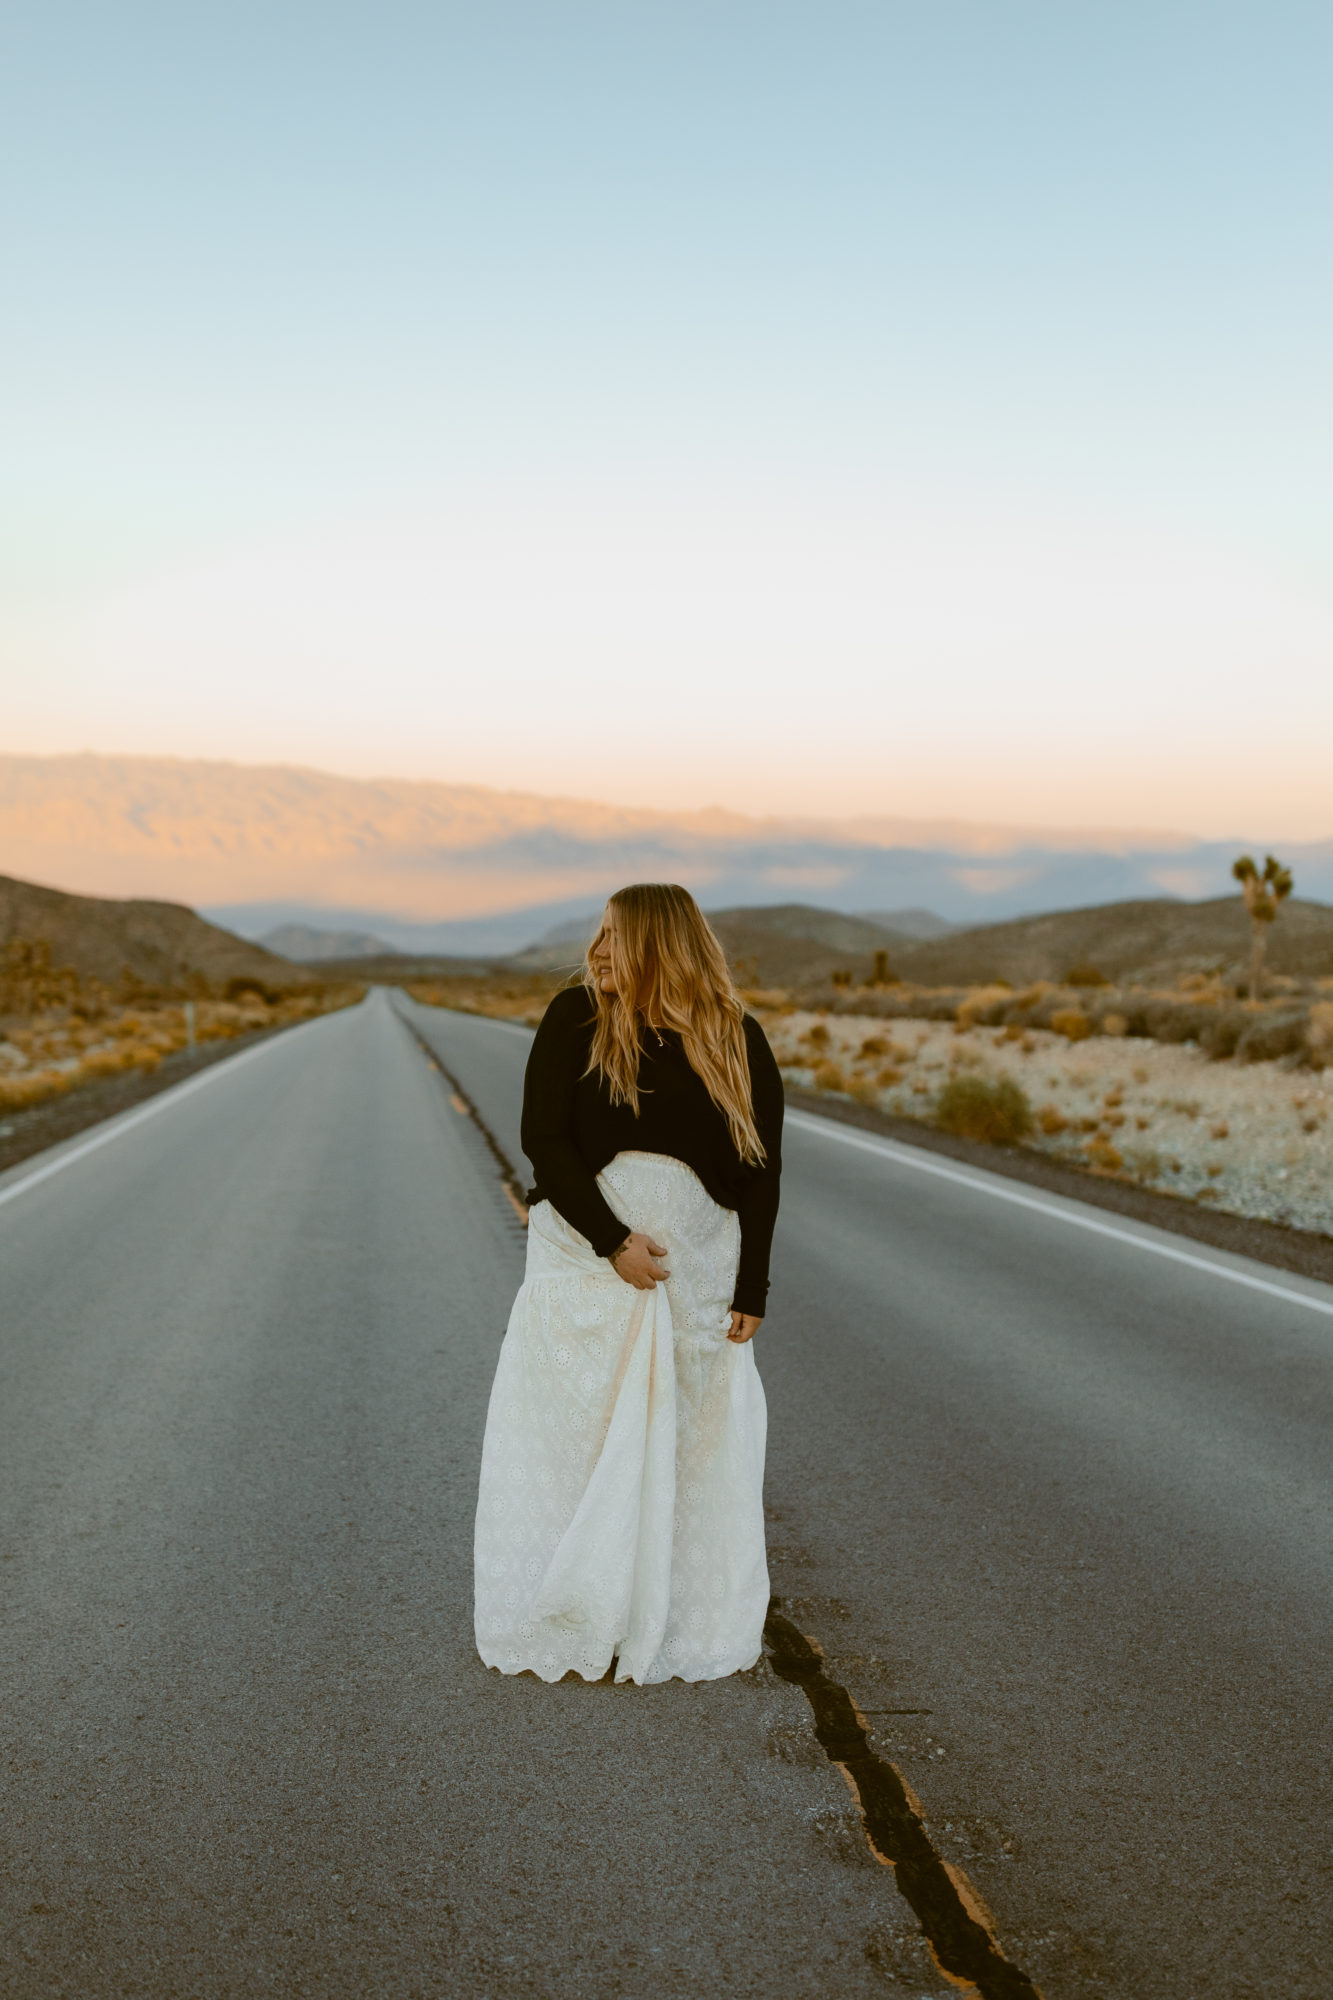 Woman posing in the middle of the road for desert photoshoot 